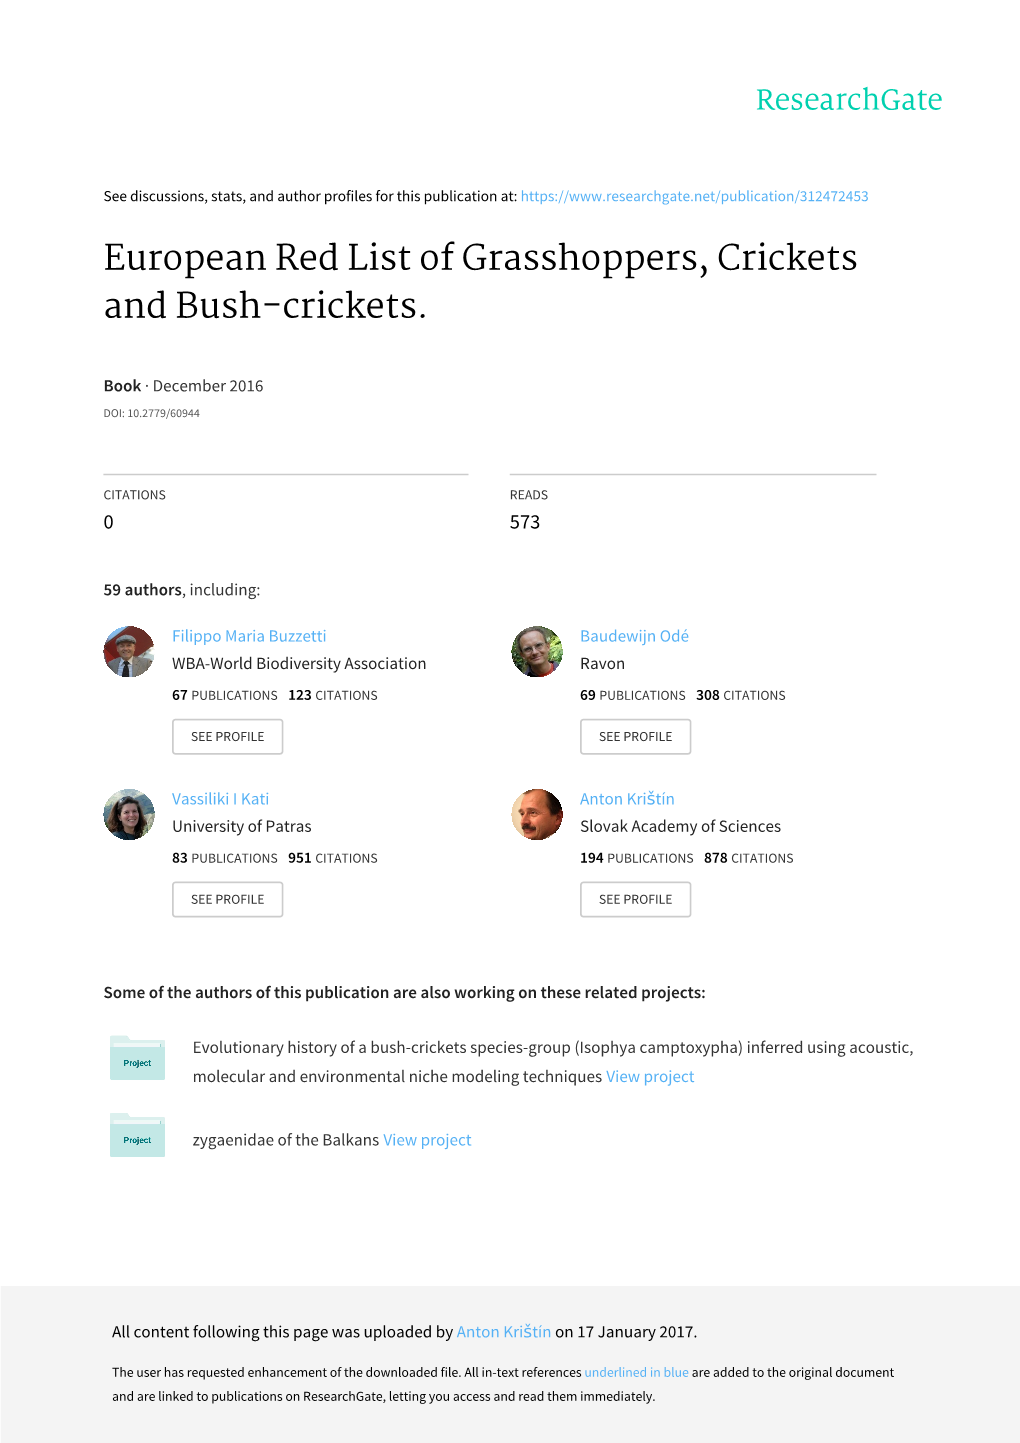 European Red List of Grasshoppers, Crickets and Bush-Crickets